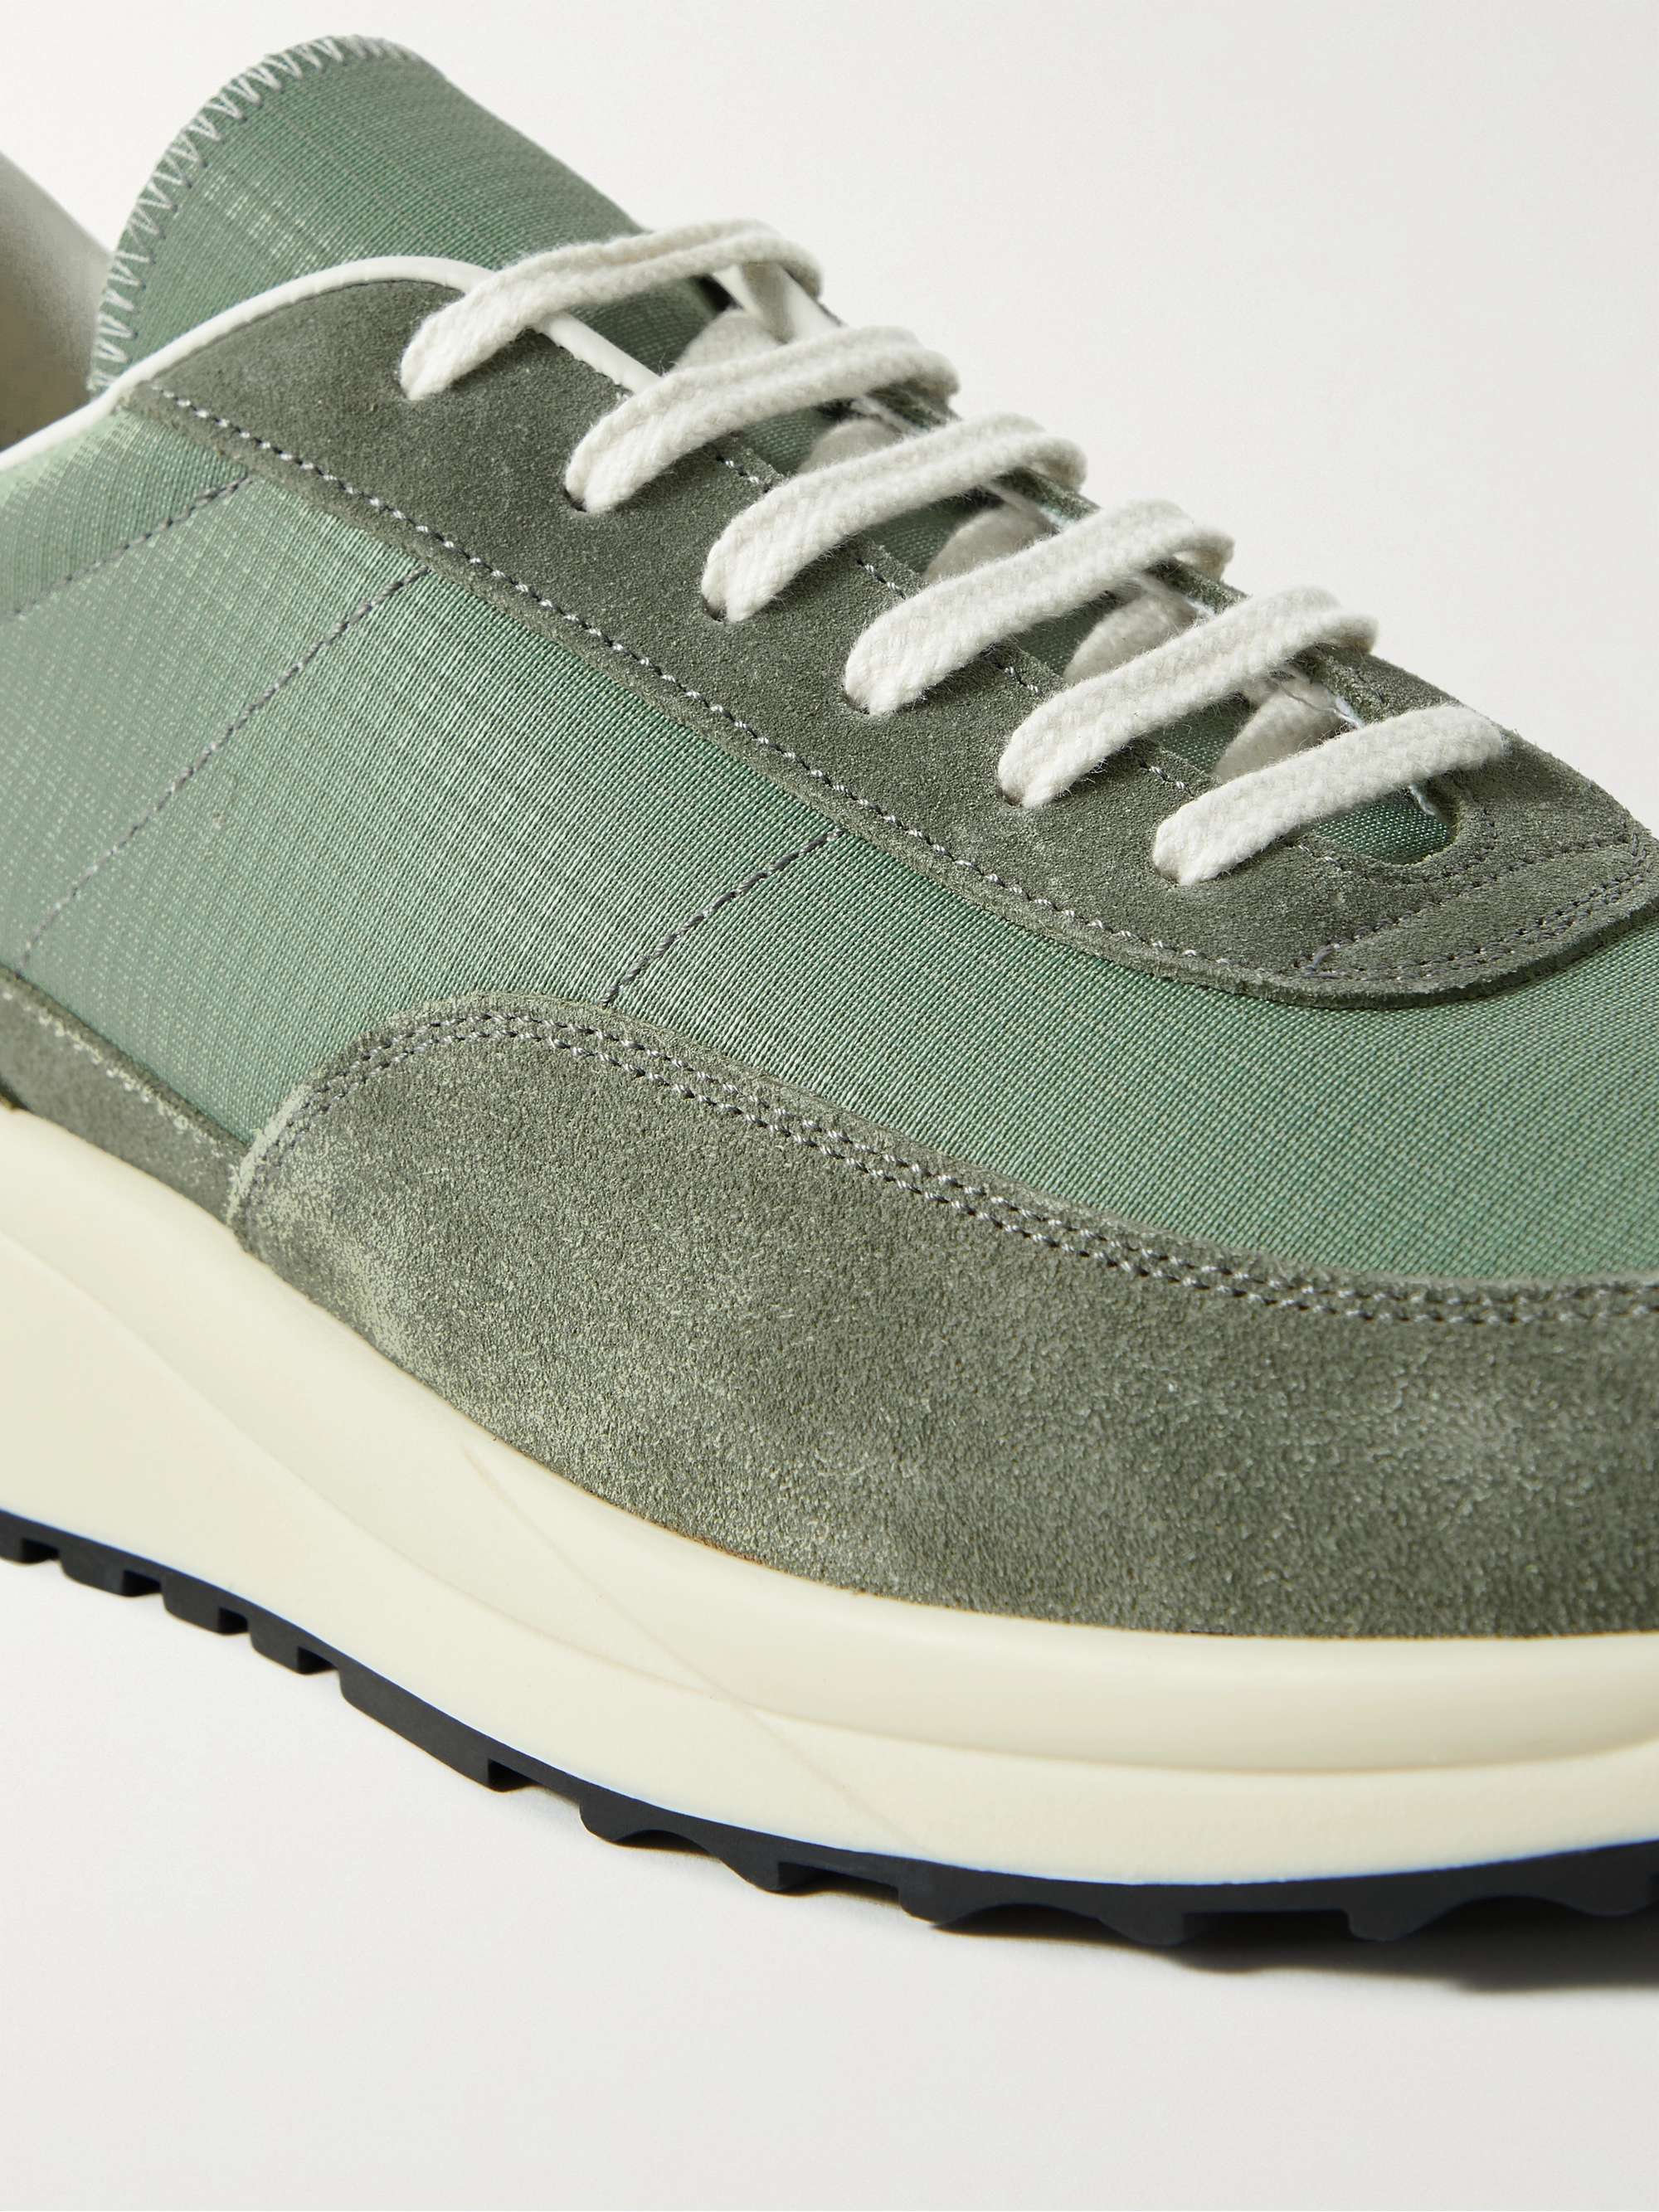 COMMON PROJECTS Track 80 Leather-Trimmed Suede and Ripstop Sneakers